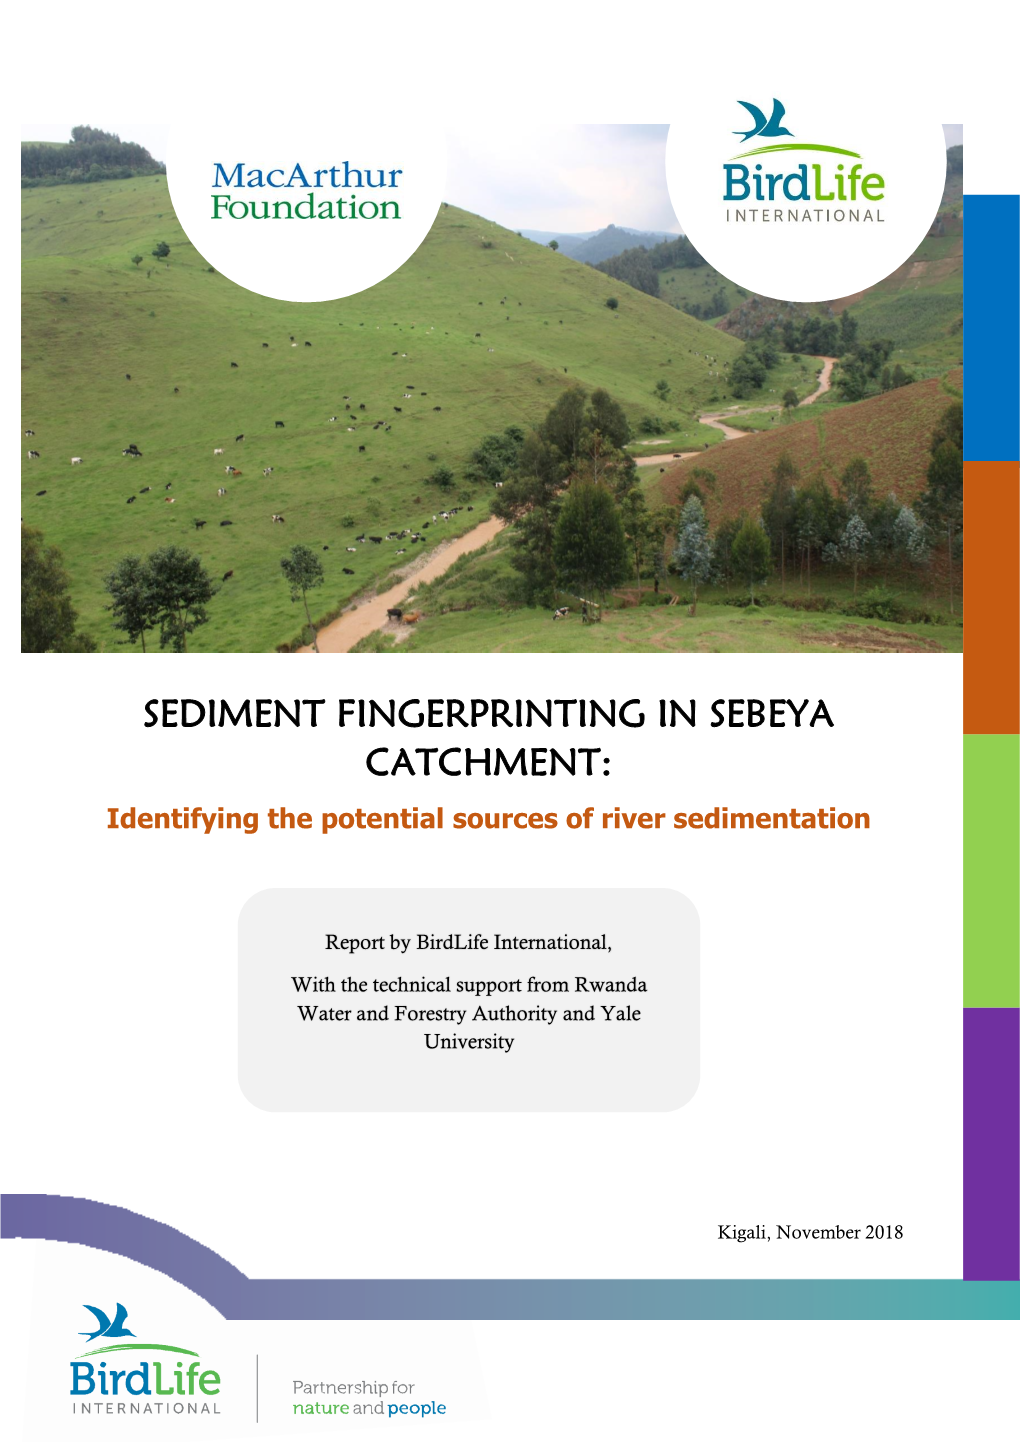 SEDIMENT FINGERPRINTING in SEBEYA CATCHMENT: Identifying the Potential Sources of River Sedimentation